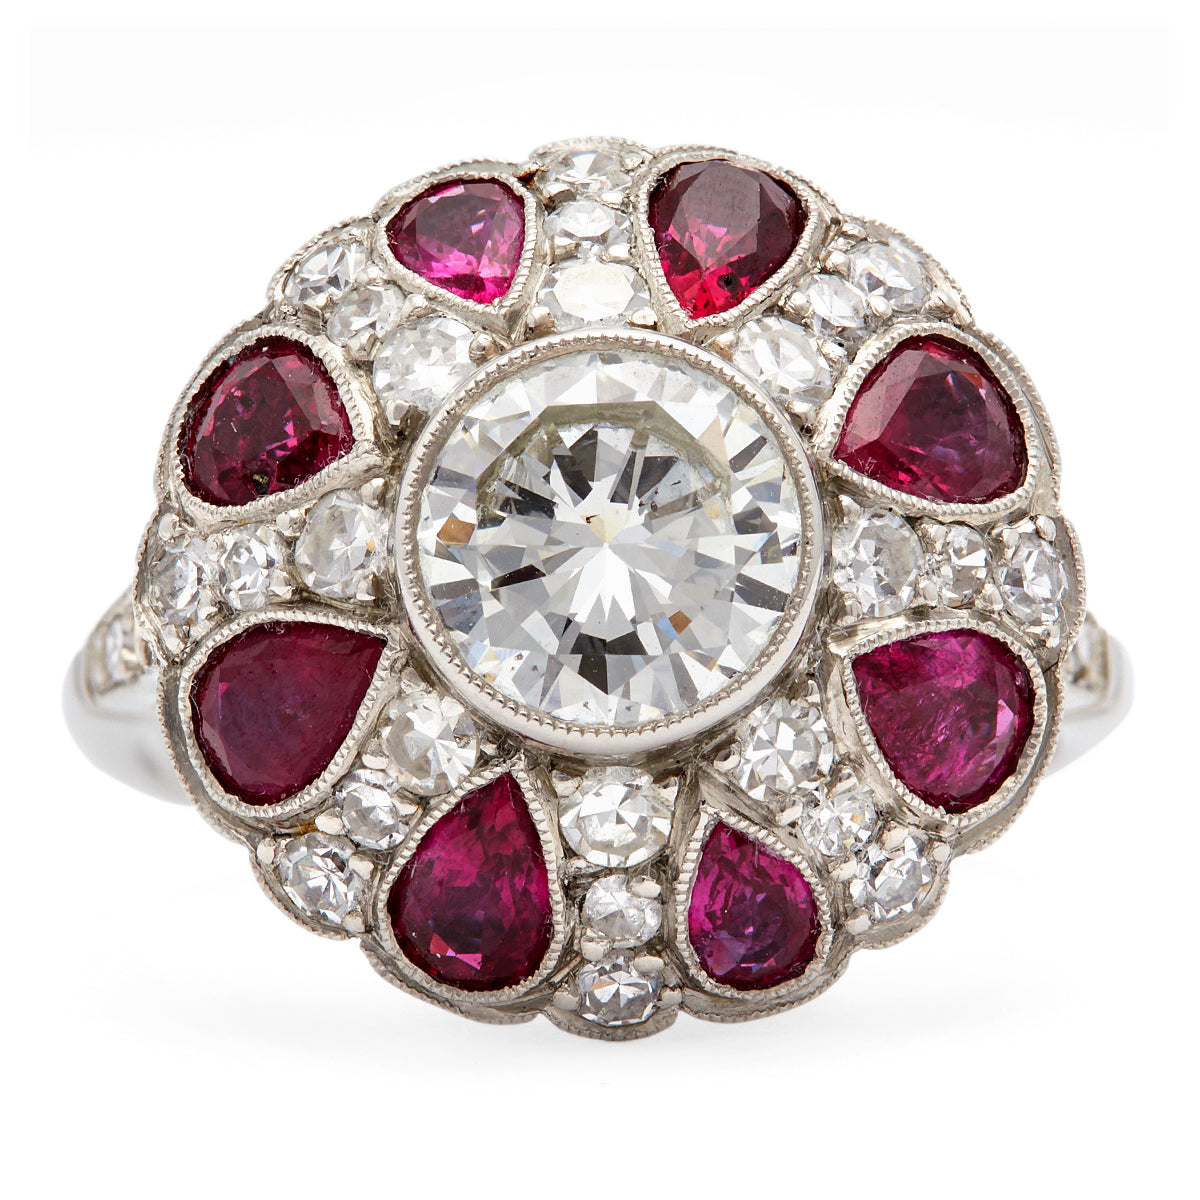 Art Deco Inspired 1.19 Carat Diamond and Ruby Platinum Filigree Ring Rings Jack Weir & Sons   